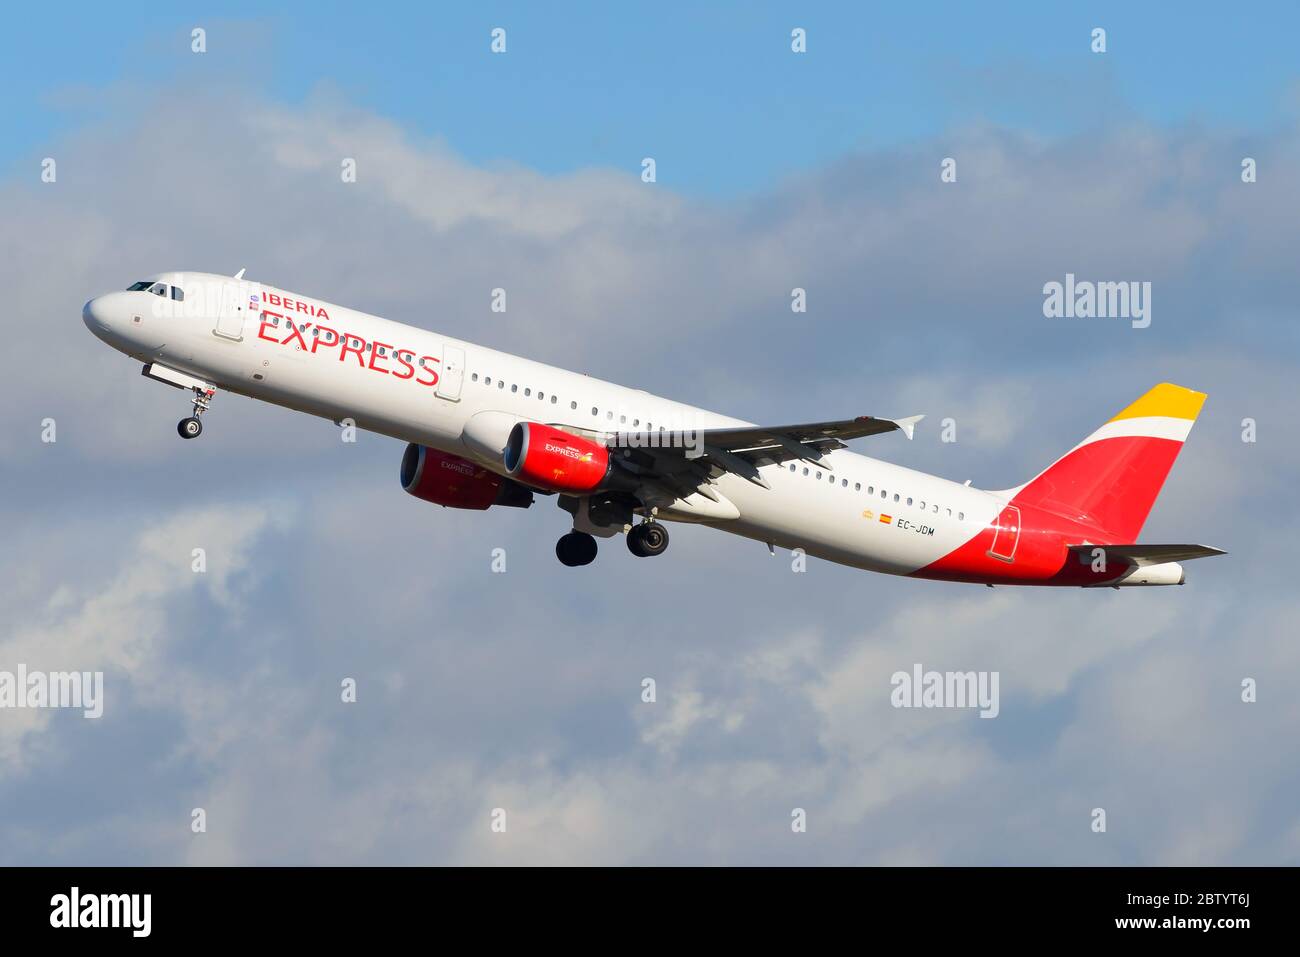 Iberia Express Airbus A321 taking off from Madrid Barajas Airport in Spain. Airplane registered as EC-JDM departing from is hub. Stock Photo